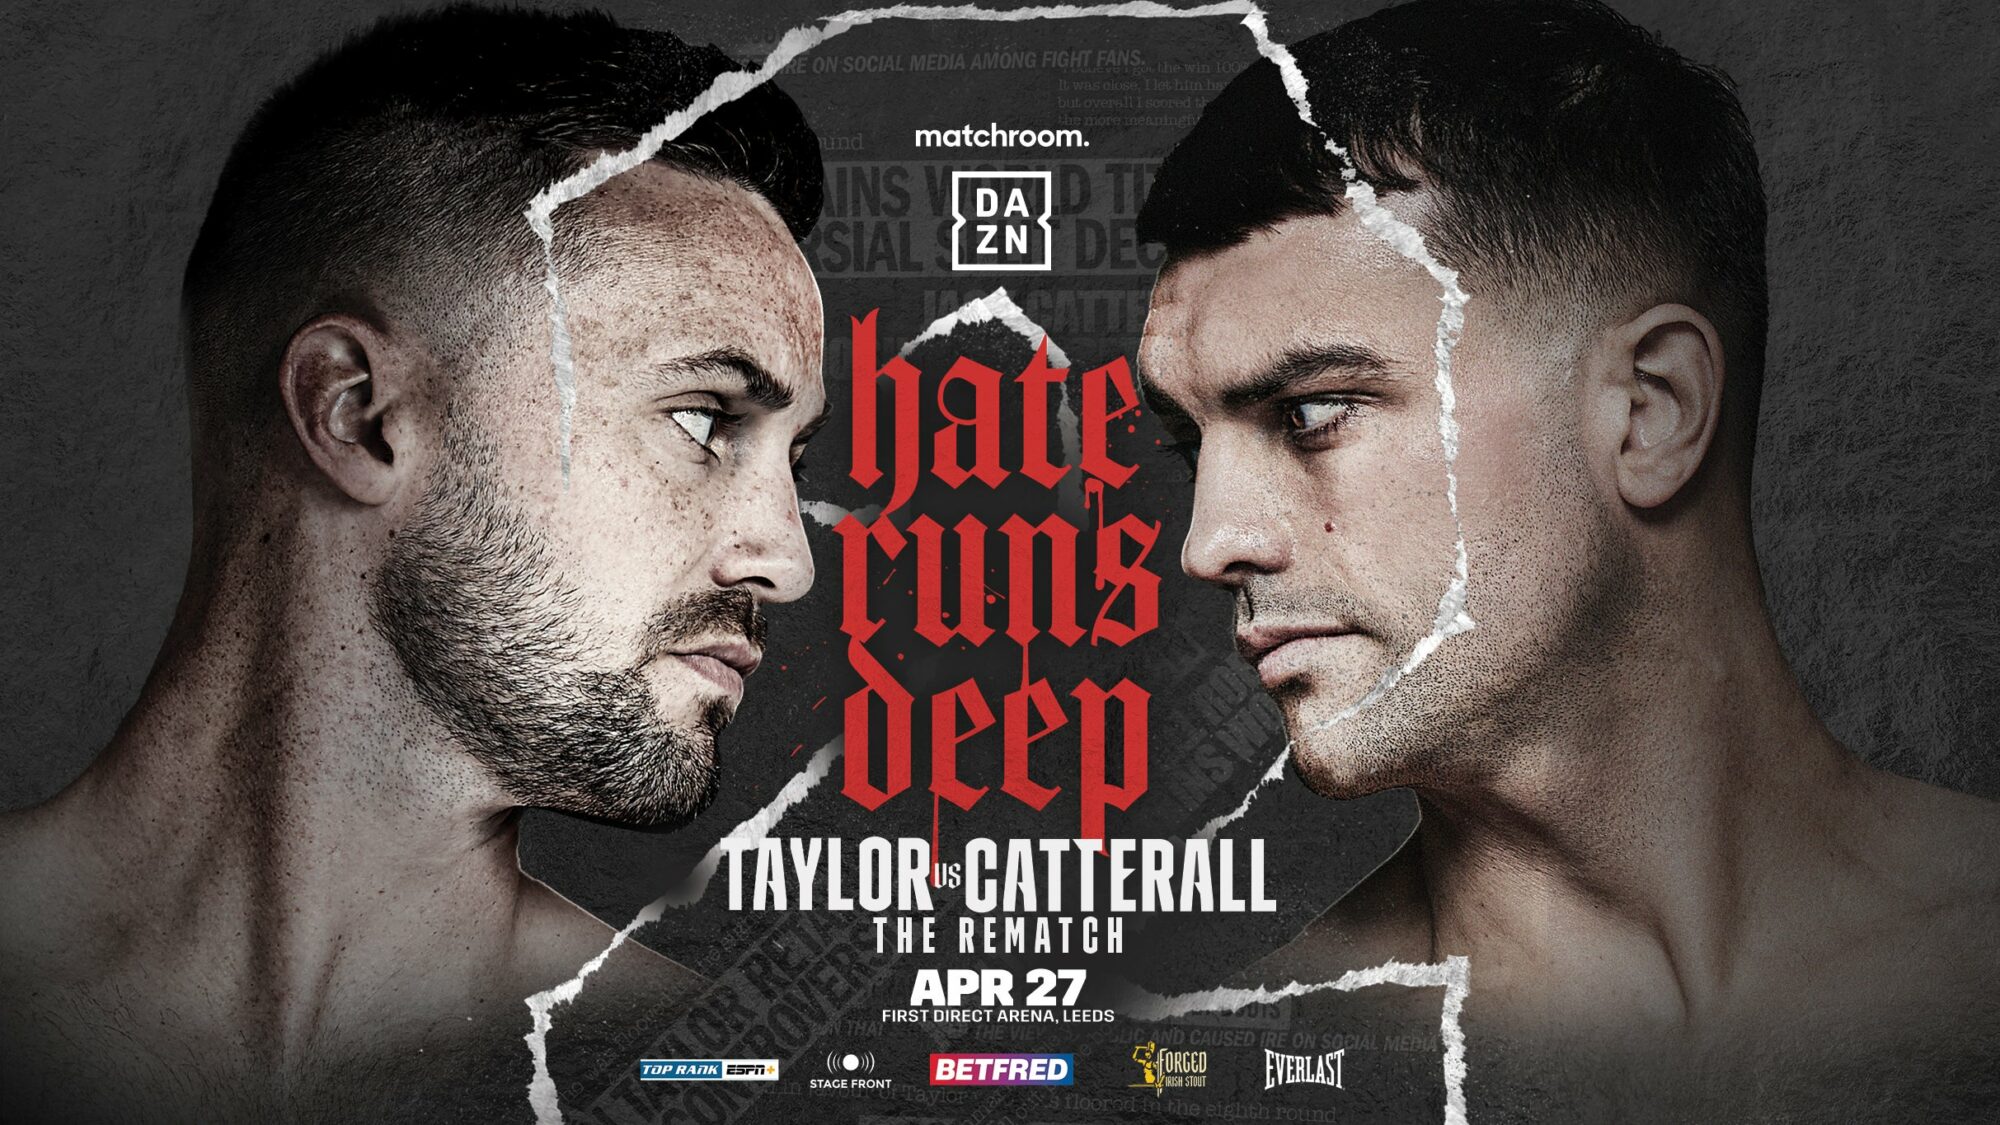 Image name Matchroom Boxing Josh Taylor vs Jack Catterall at First Direct Arena Leeds the 1 image from the post Matchroom Boxing: Josh Taylor vs Jack Catterall at First Direct Arena, Leeds in Yorkshire.com.